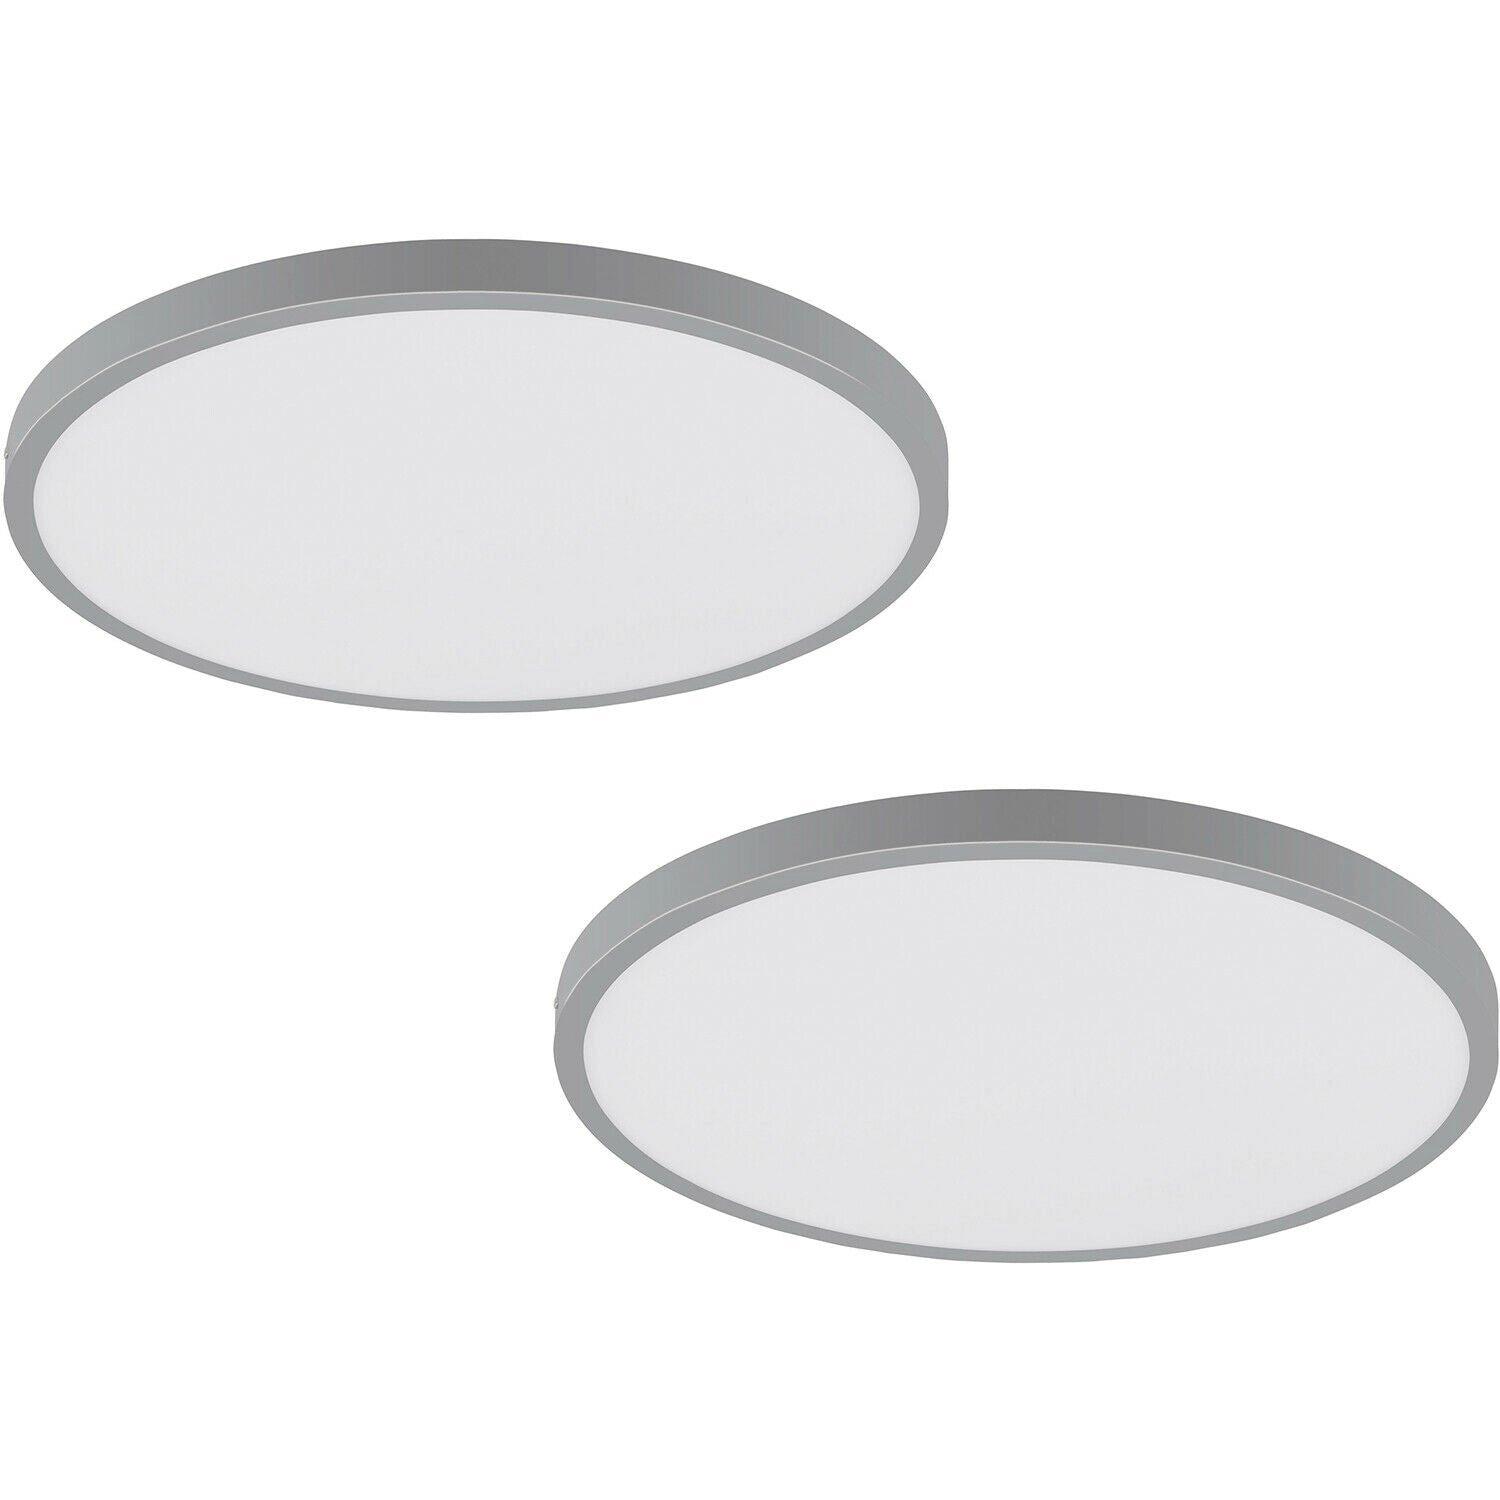 2 PACK Wall / Ceiling Light Silver 400mm Round Surface Mounted 25W LED 4000K